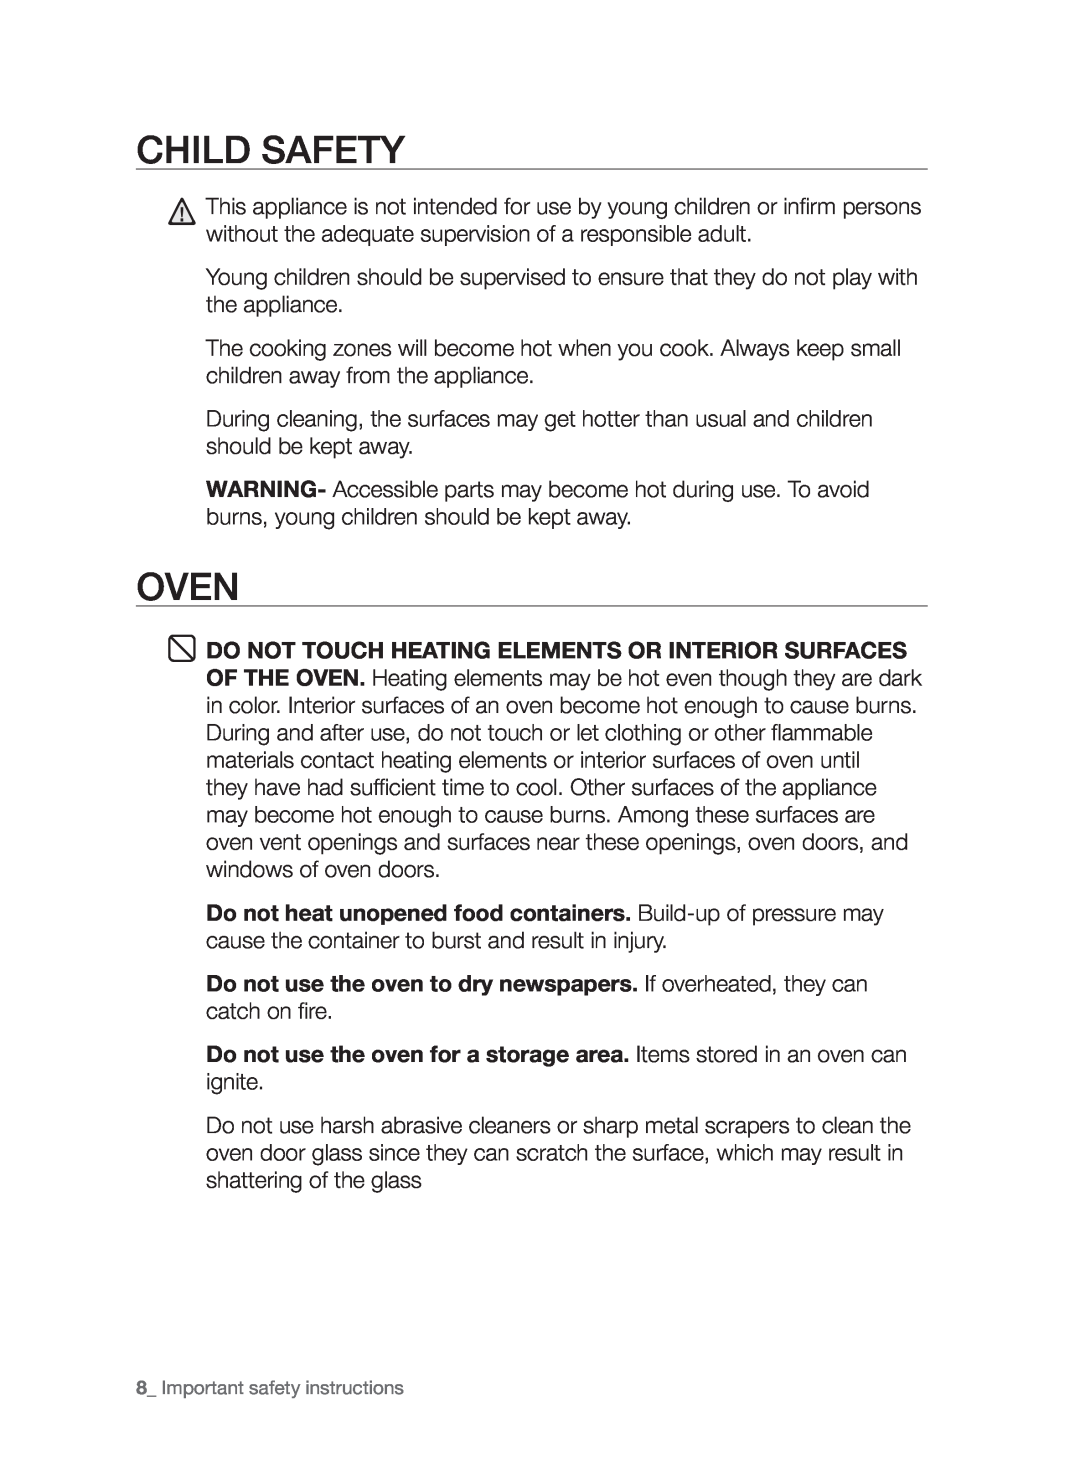 Samsung FTQ307NWGX user manual Child safety, Oven, Important safety instructions 